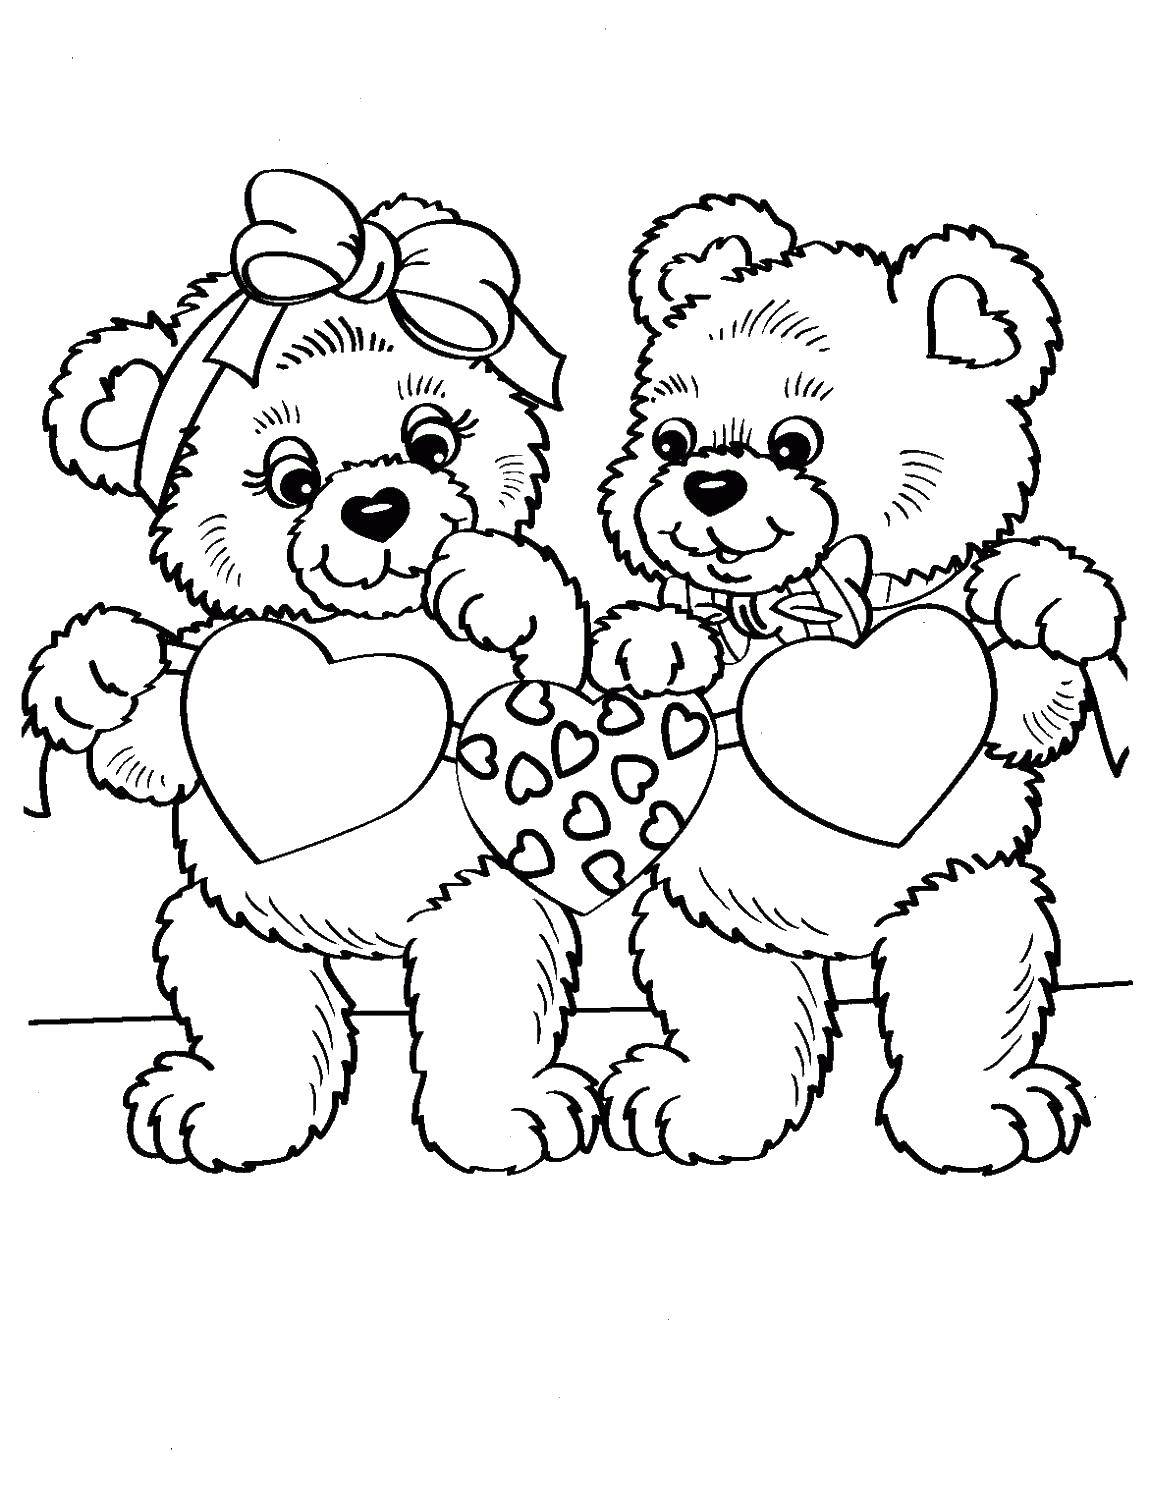 Coloring Bears cut out hearts. Category Valentines day. Tags:  Valentines day, love, heart, Teddy bear.